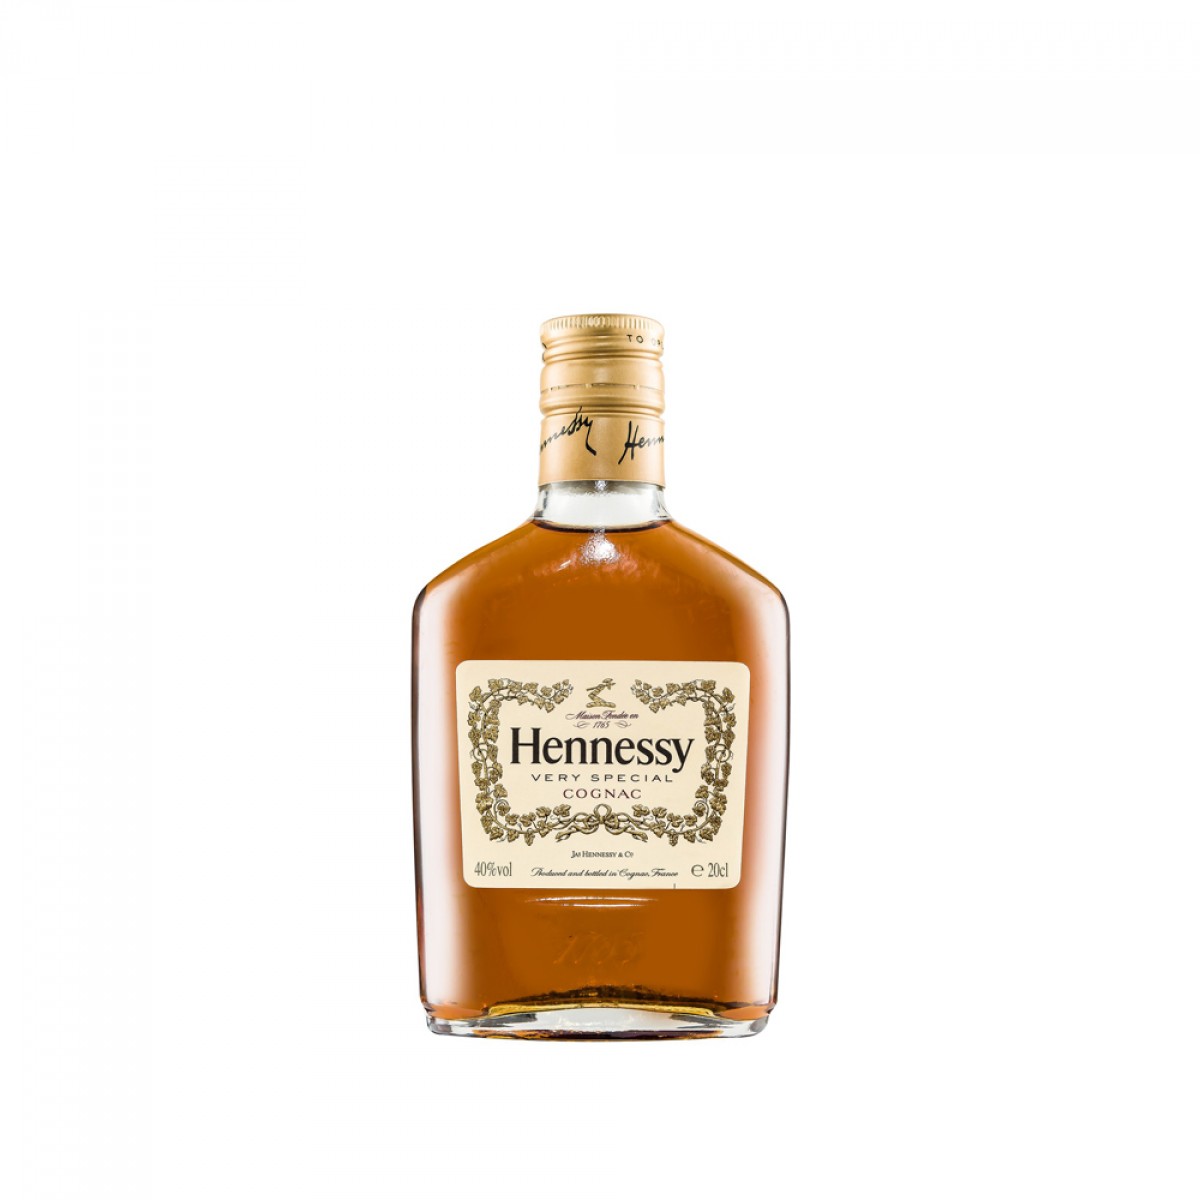 Tennessee Honey - Aelia Duty Free 10% off on your online order